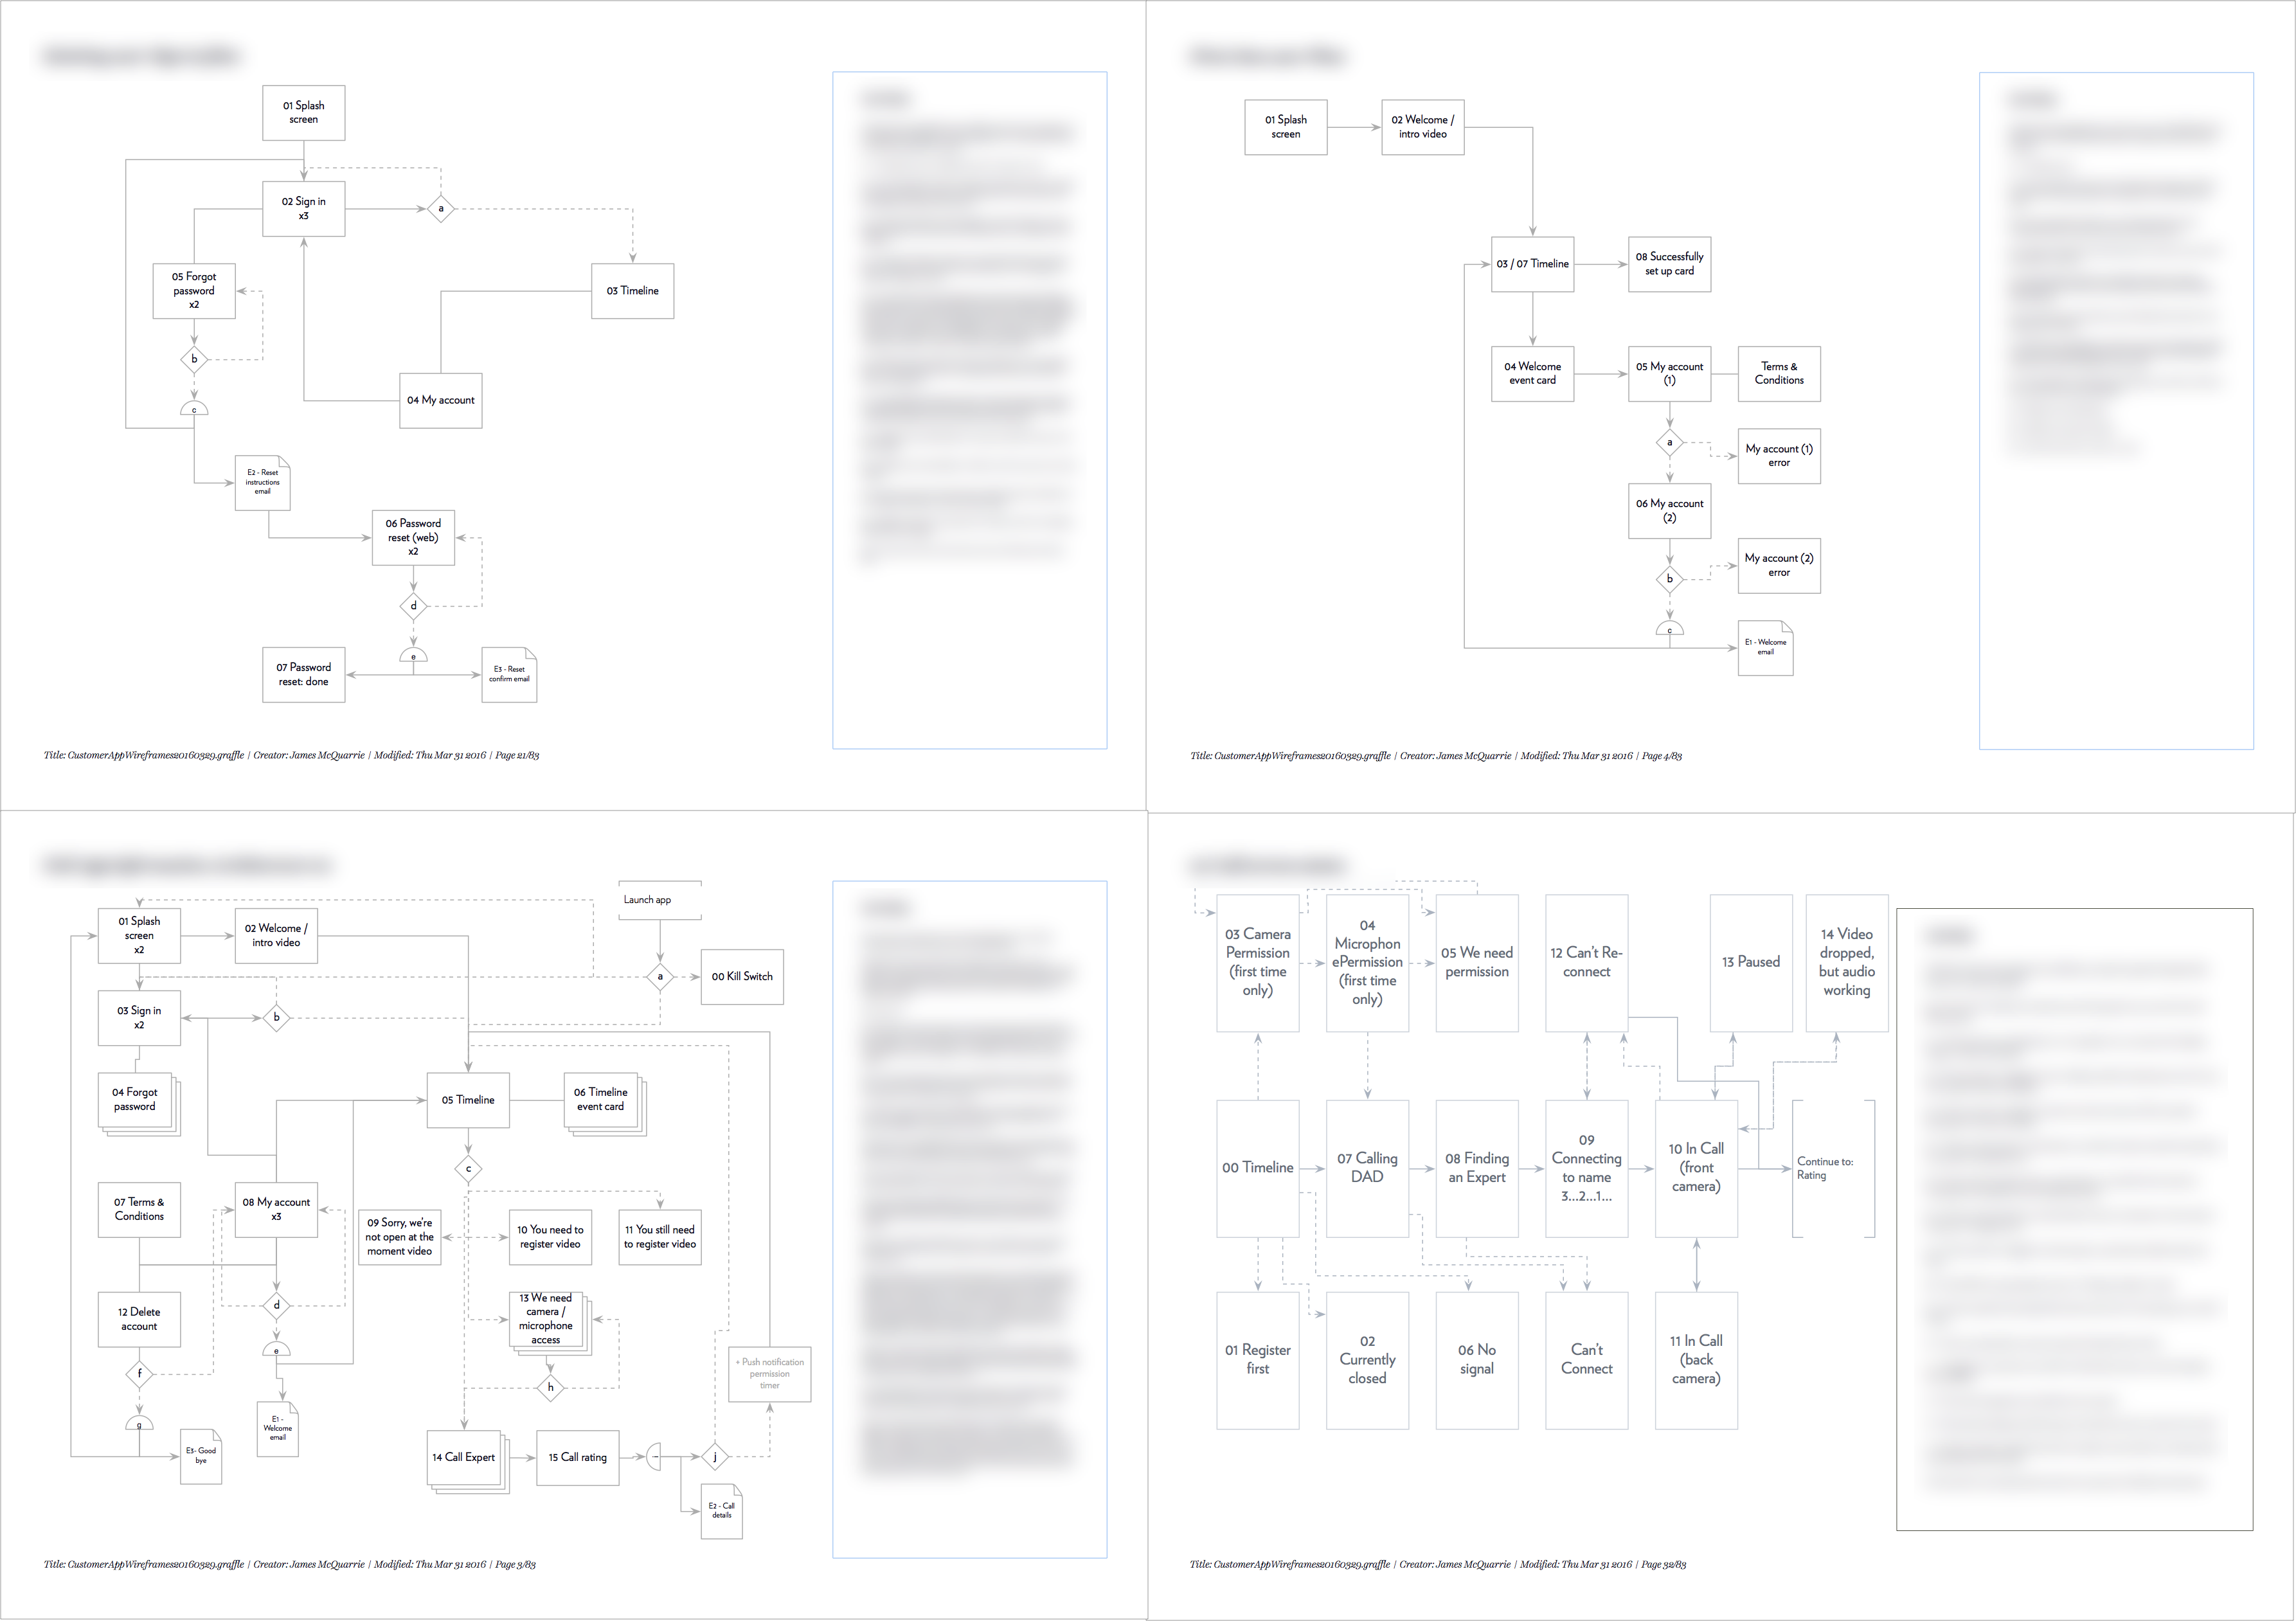 Examples of Information Architecture diagrams and process diagrams from my time at DAD